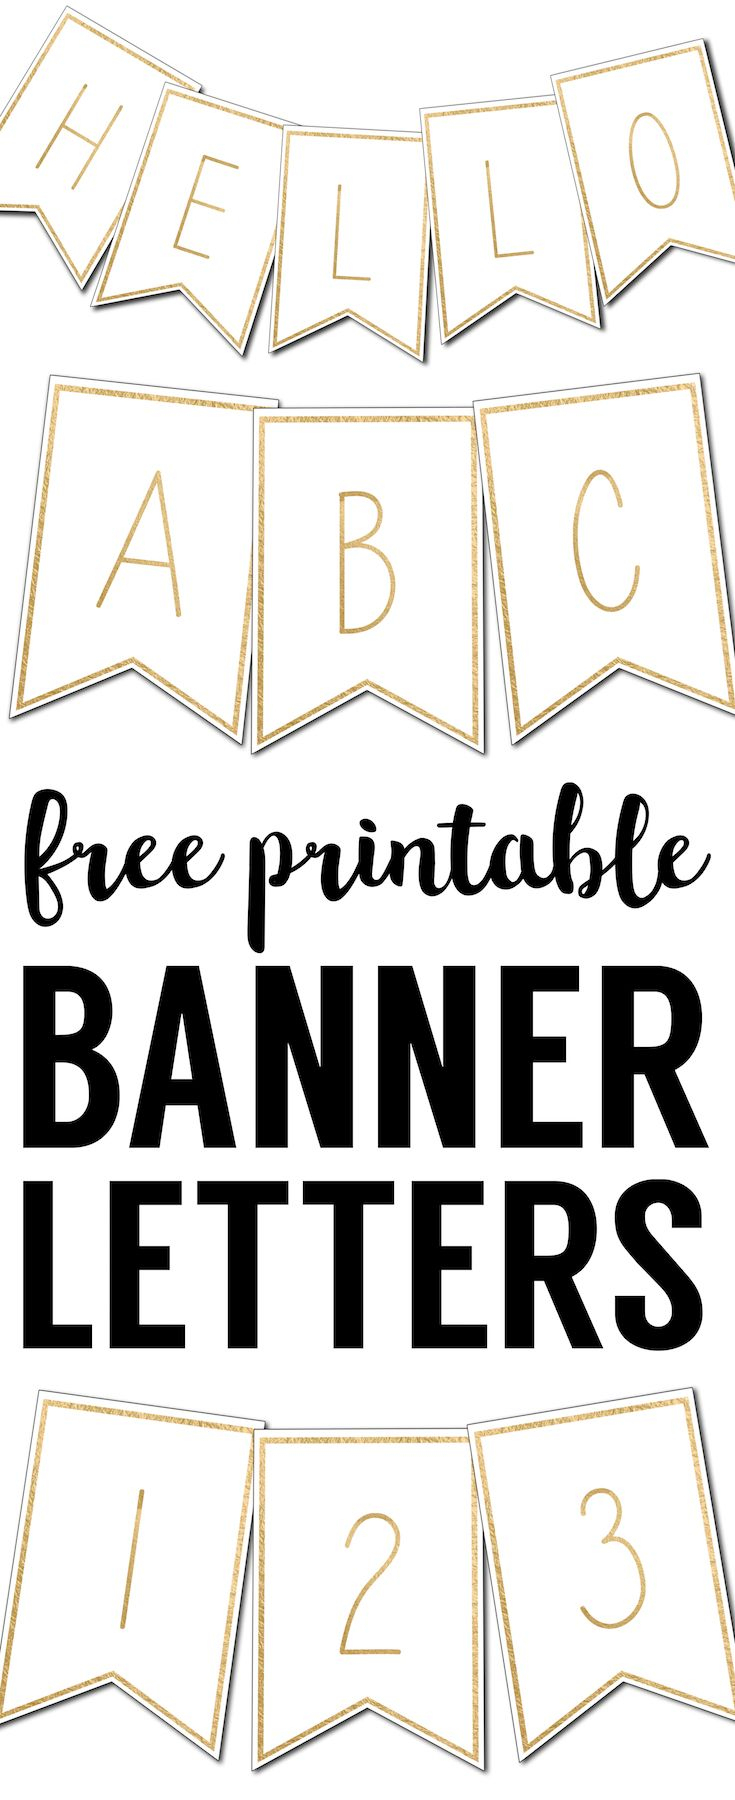 Free Printable Banner Letters Templates | Krštenje | Pinterest - Printable Banner Letters Template Free